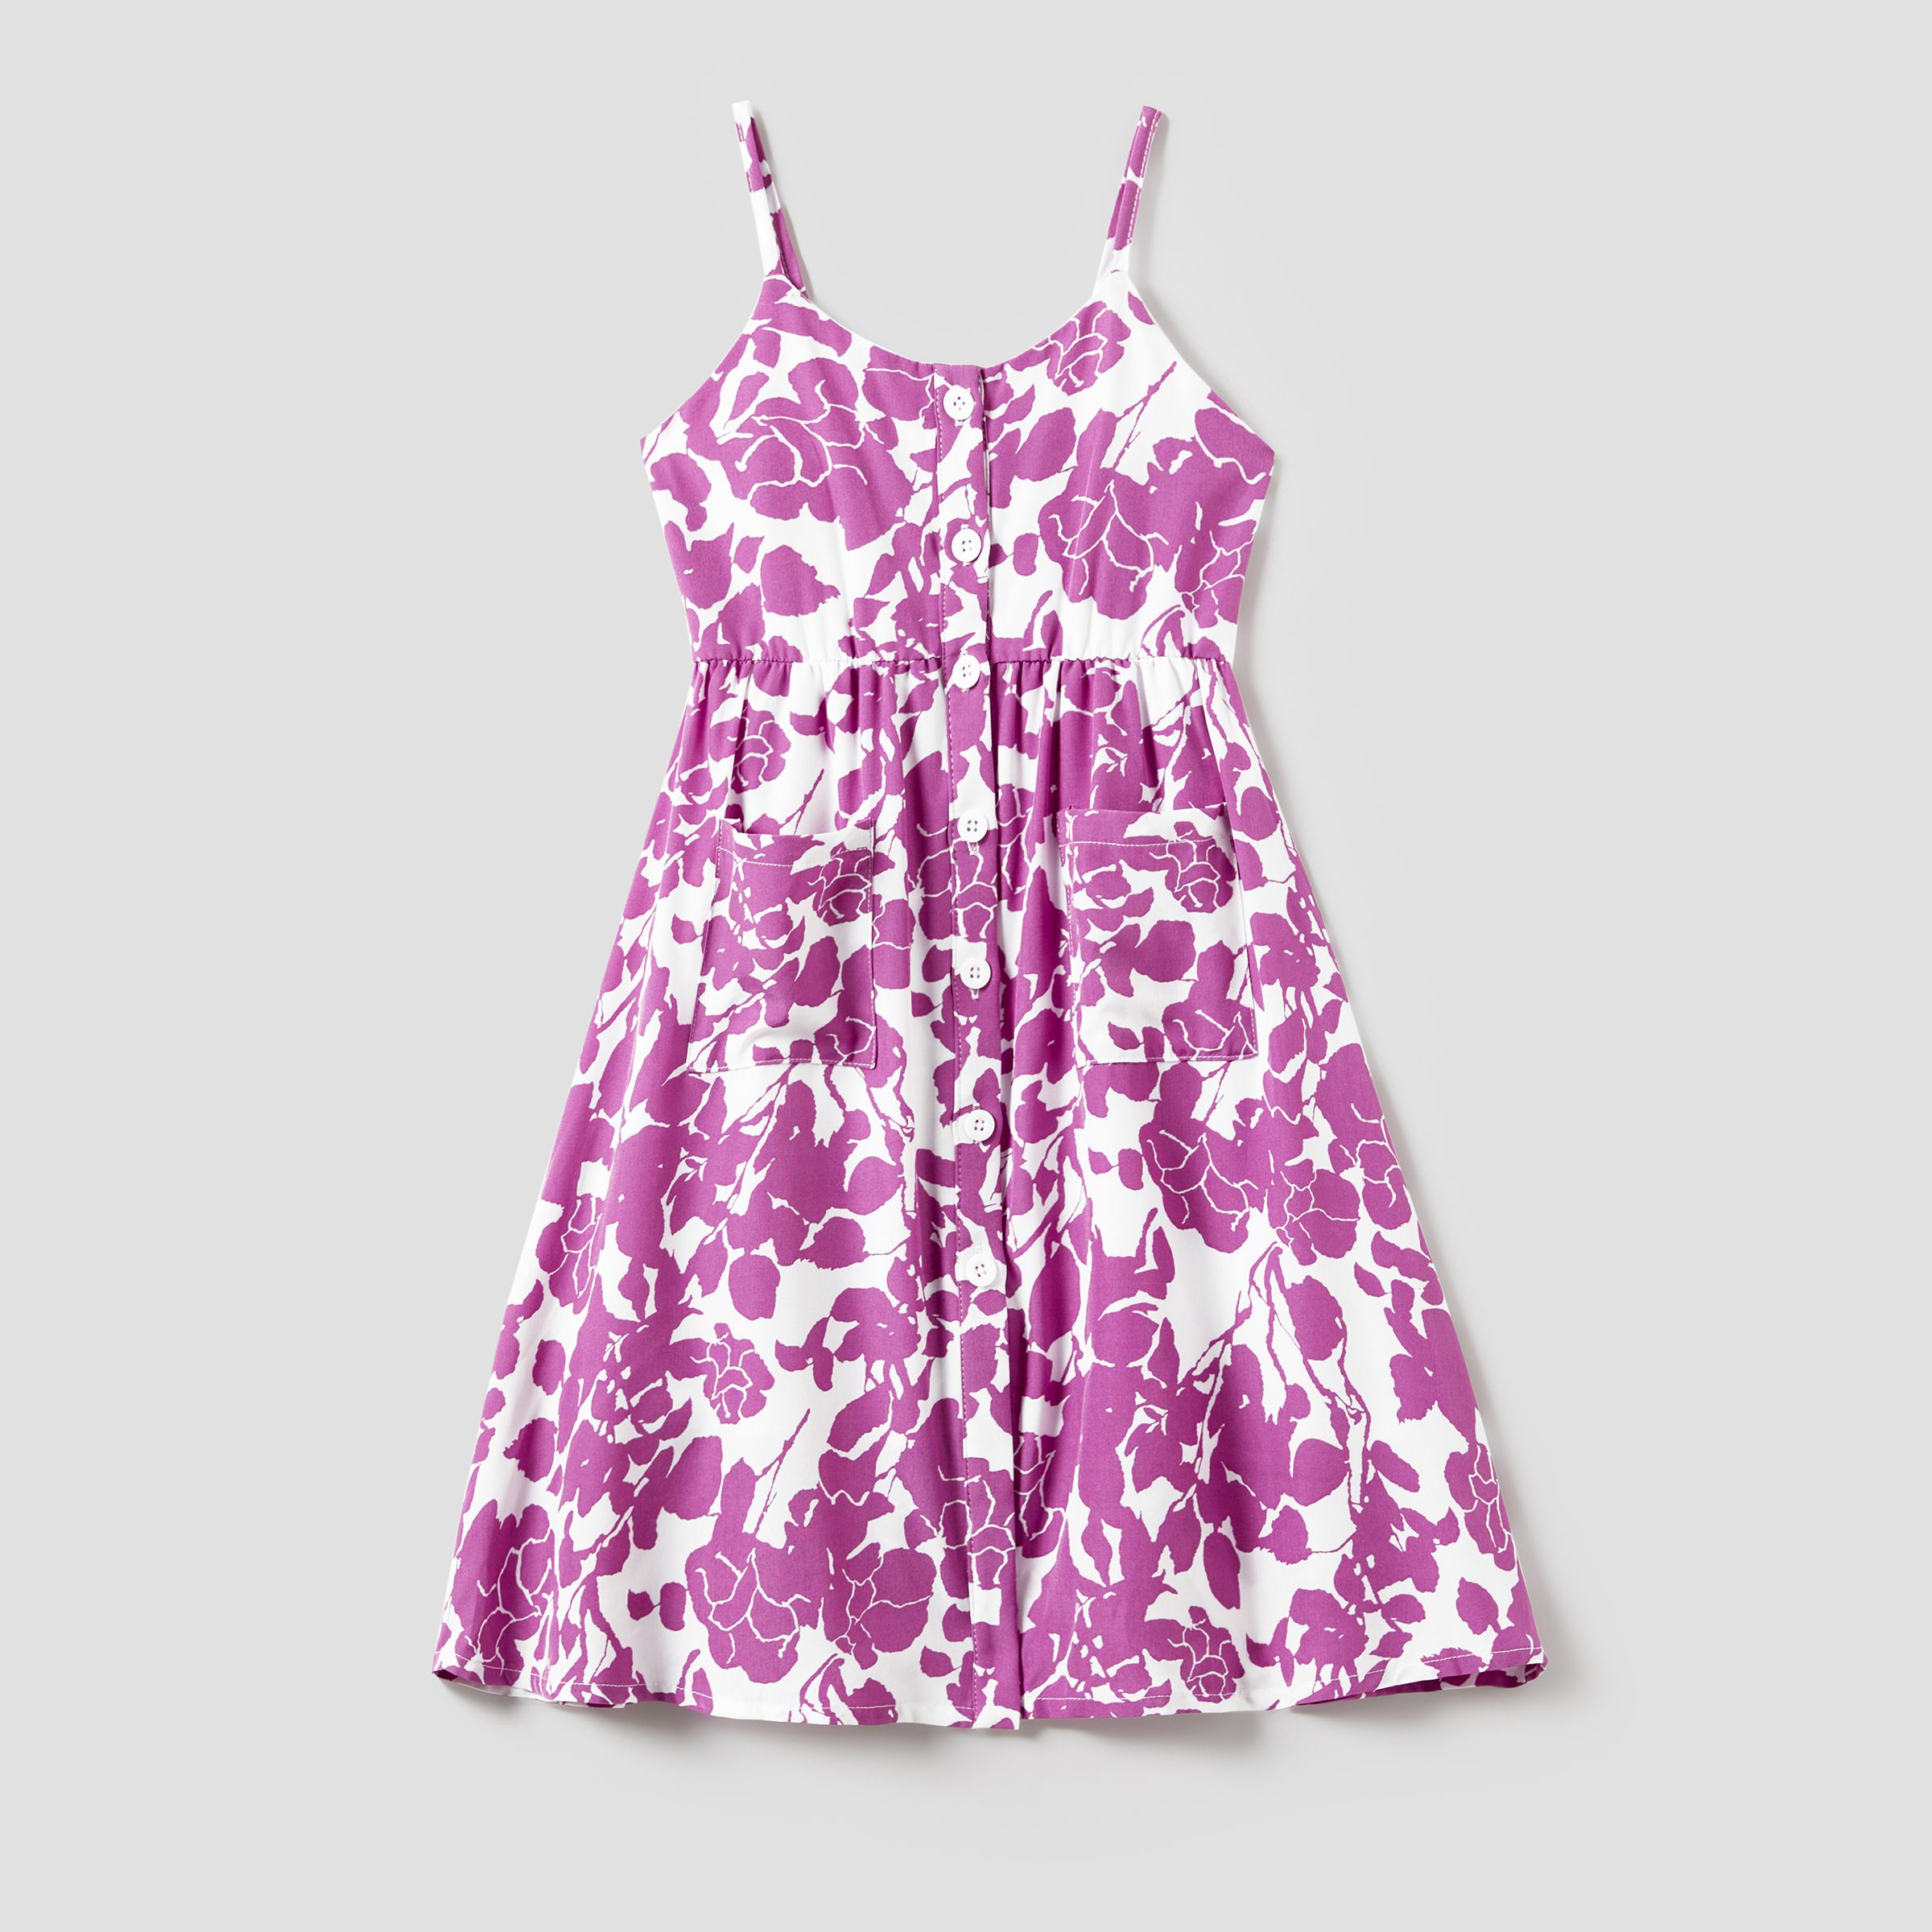 Mommy and Me Purple Floral Button Up Strap Dresses with Pockets